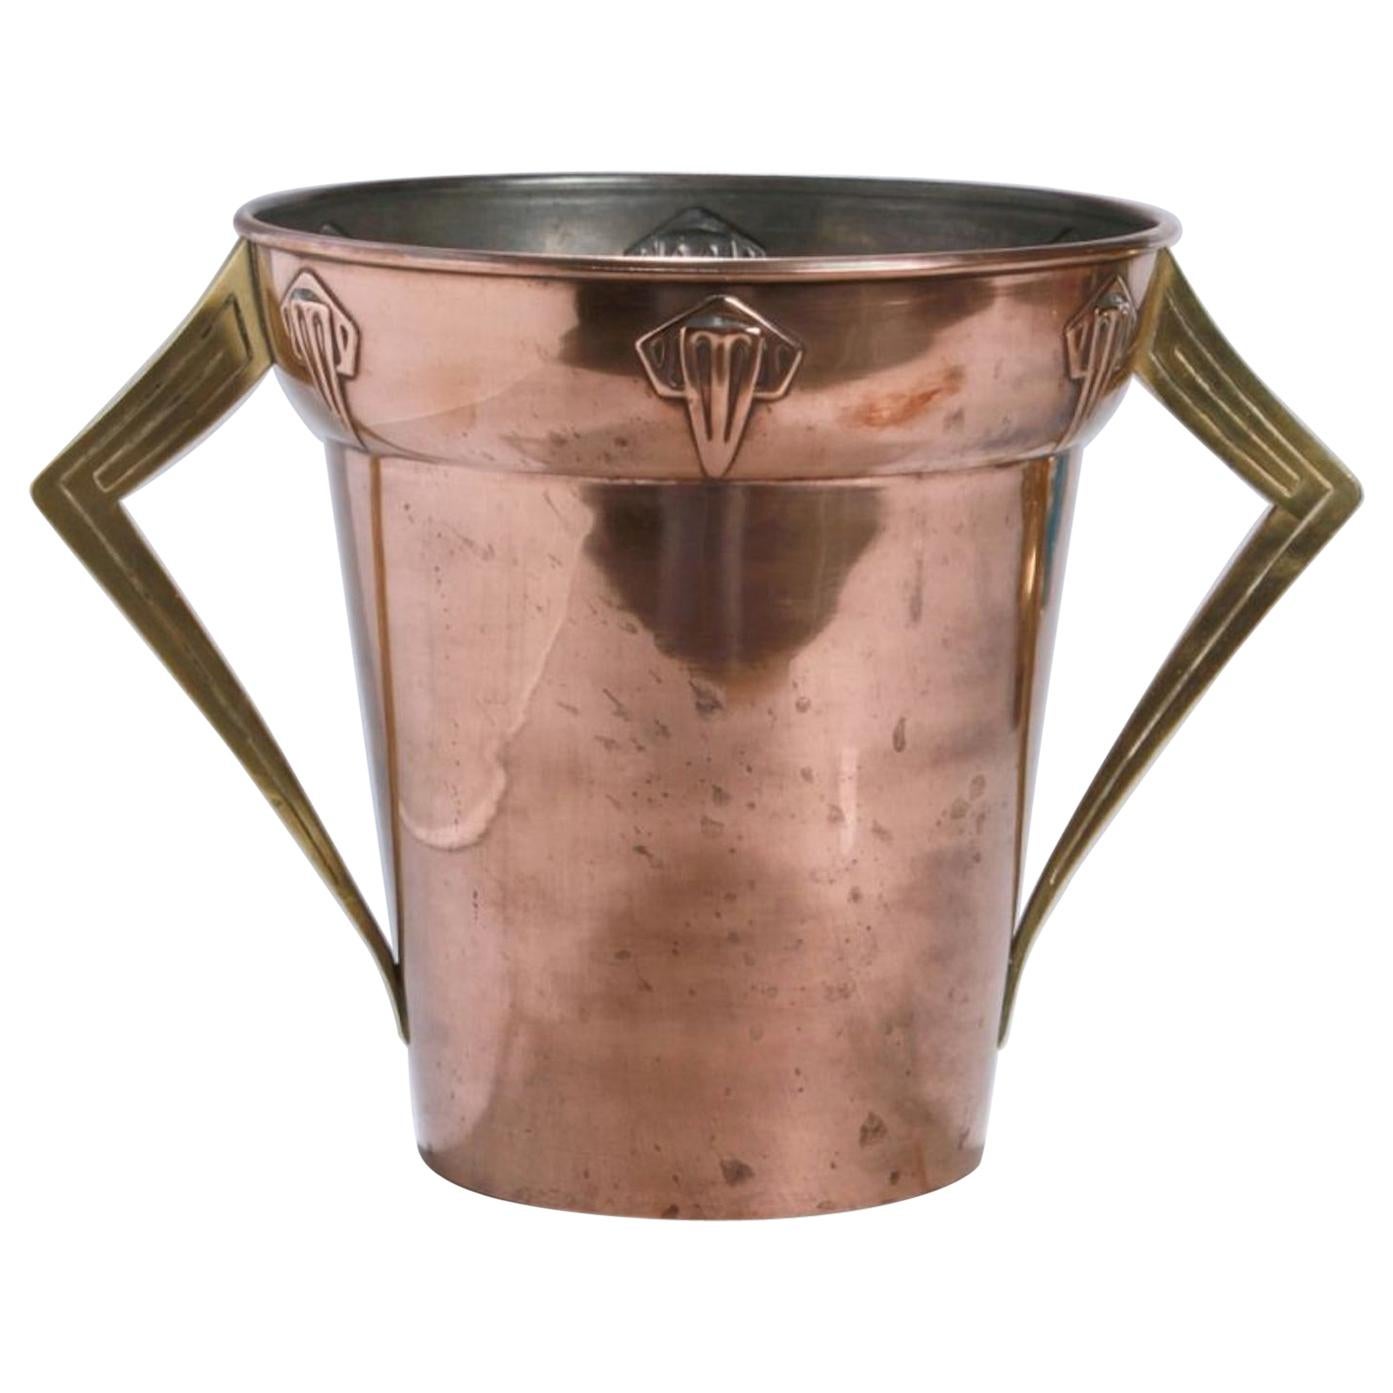 Jugendstil Copper and Brass Ice Container, Germany, 1910s